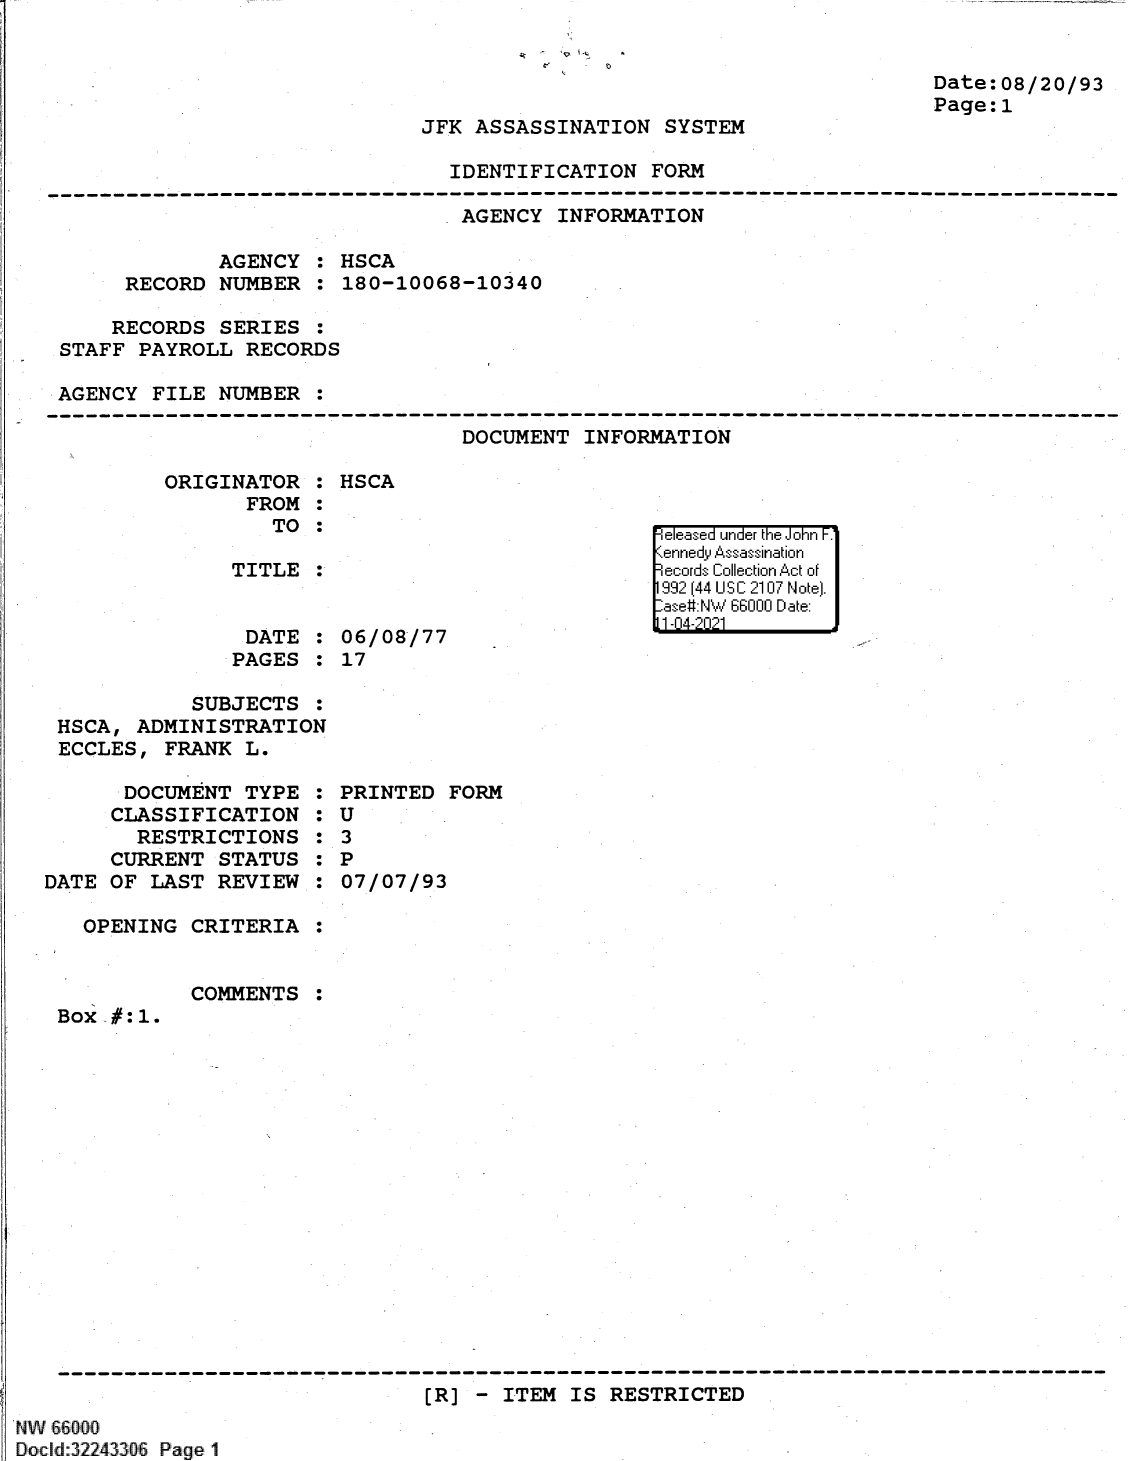 handle is hein.jfk/jfkarch61364 and id is 1 raw text is: . - I P  .,

Date:08/20/93
Page:1

JFK ASSASSINATION SYSTEM

IDENTIFICATION FORM

AGENCY INFORMATION
AGENCY : HSCA
RECORD NUMBER : 180-10068-10340
RECORDS SERIES :
STAFF PAYROLL RECORDS
AGENCY FILE NUMBER :

DOCUMENT INFORMATION

ORIGINATOR :
FROM :
TO :
TITLE :

DATE :
PAGES :

HSCA

06/08/77
17

SUBJECTS :
HSCA, ADMINISTRATION
ECCLES, FRANK L.

DOCUMENT TYPE
CLASSIFICATION
RESTRICTIONS
CURRENT STATUS
DATE OF LAST REVIEW
OPENING CRITERIA

COMMENTS

:0
:0
:0
:0
:0
:

PRINTED FORM
U
3
P
07/07/93

:

Box #:1.

[R] - ITEM IS RESTRICTED

   IW 66000
Docld:32243306 Page 1

e ease'  u =' nde'r theF Jonr F.1
9ecord  Coi Ii'lleio  Aci'i -'t of
1-sI N '14411  Dail  N~teI.
111-04-2l21


